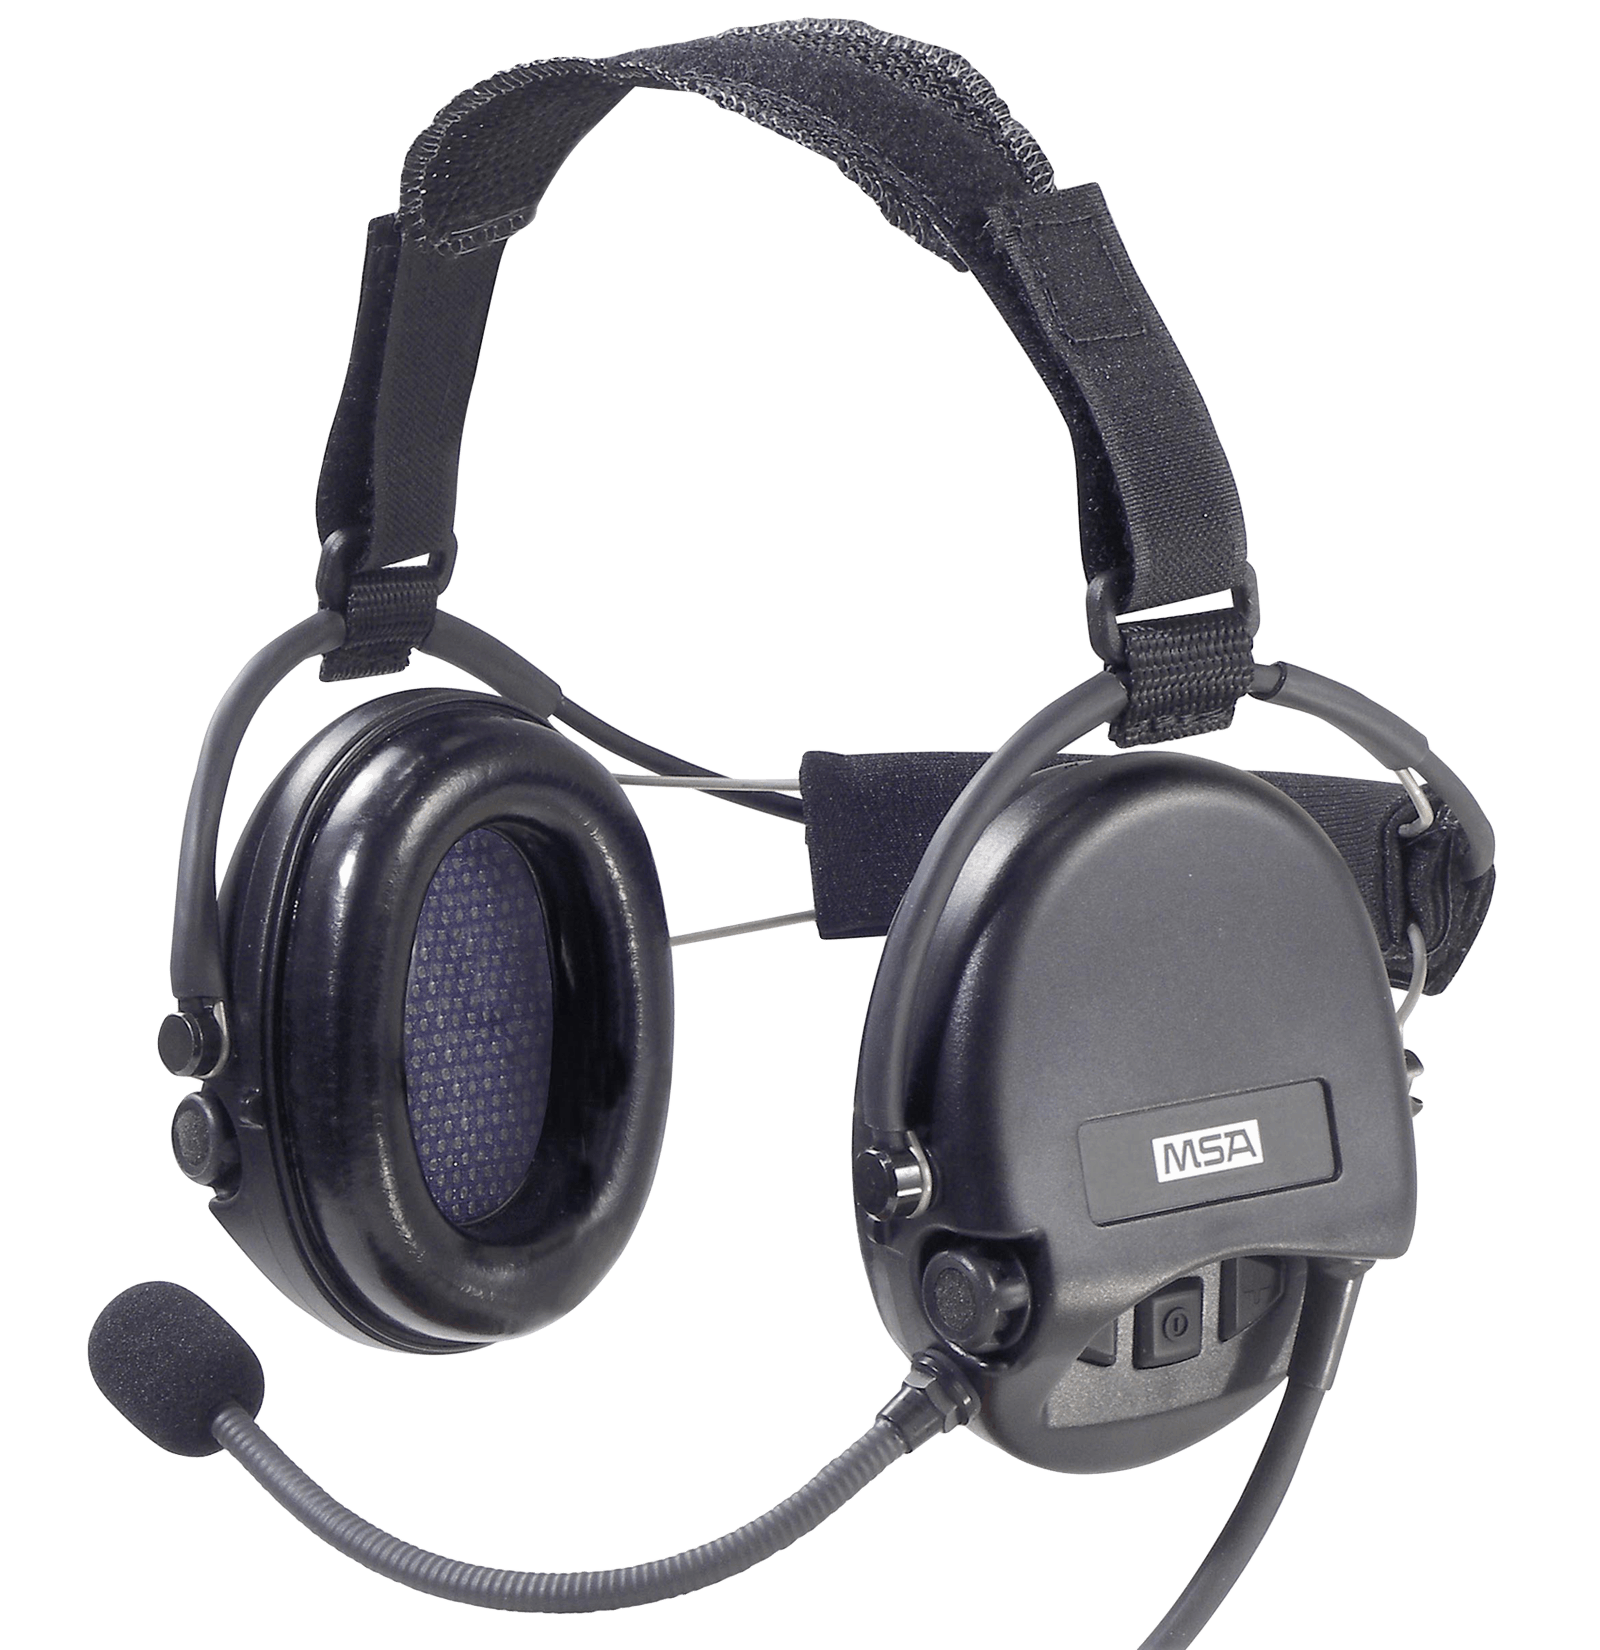 Noise cancelling audio headset with situation awareness